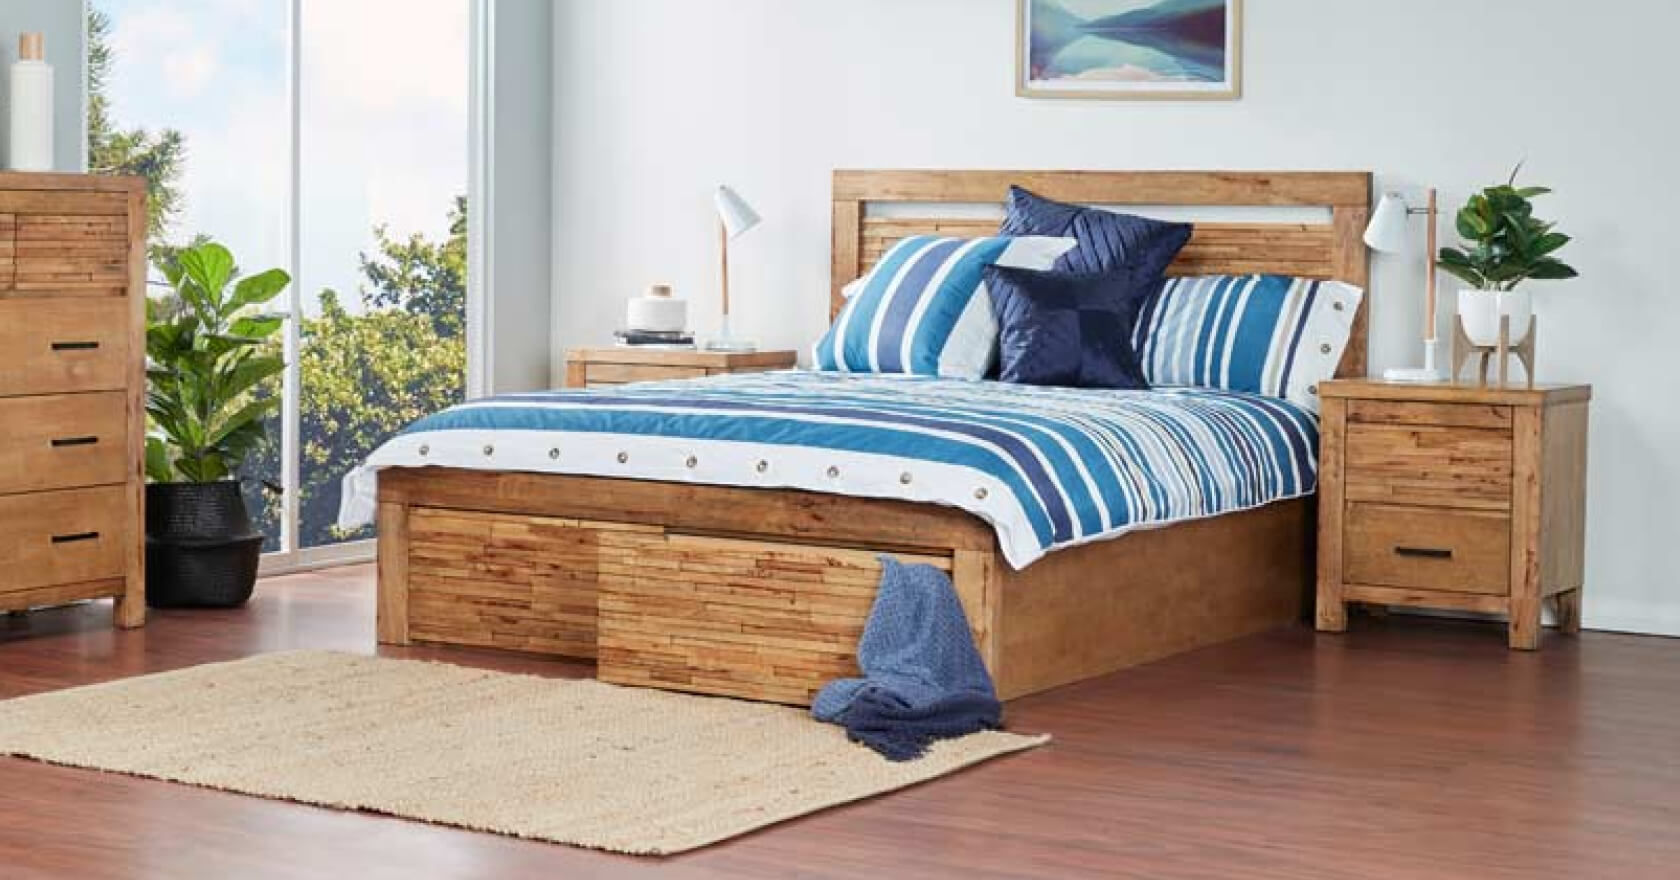 The Dion bed frame